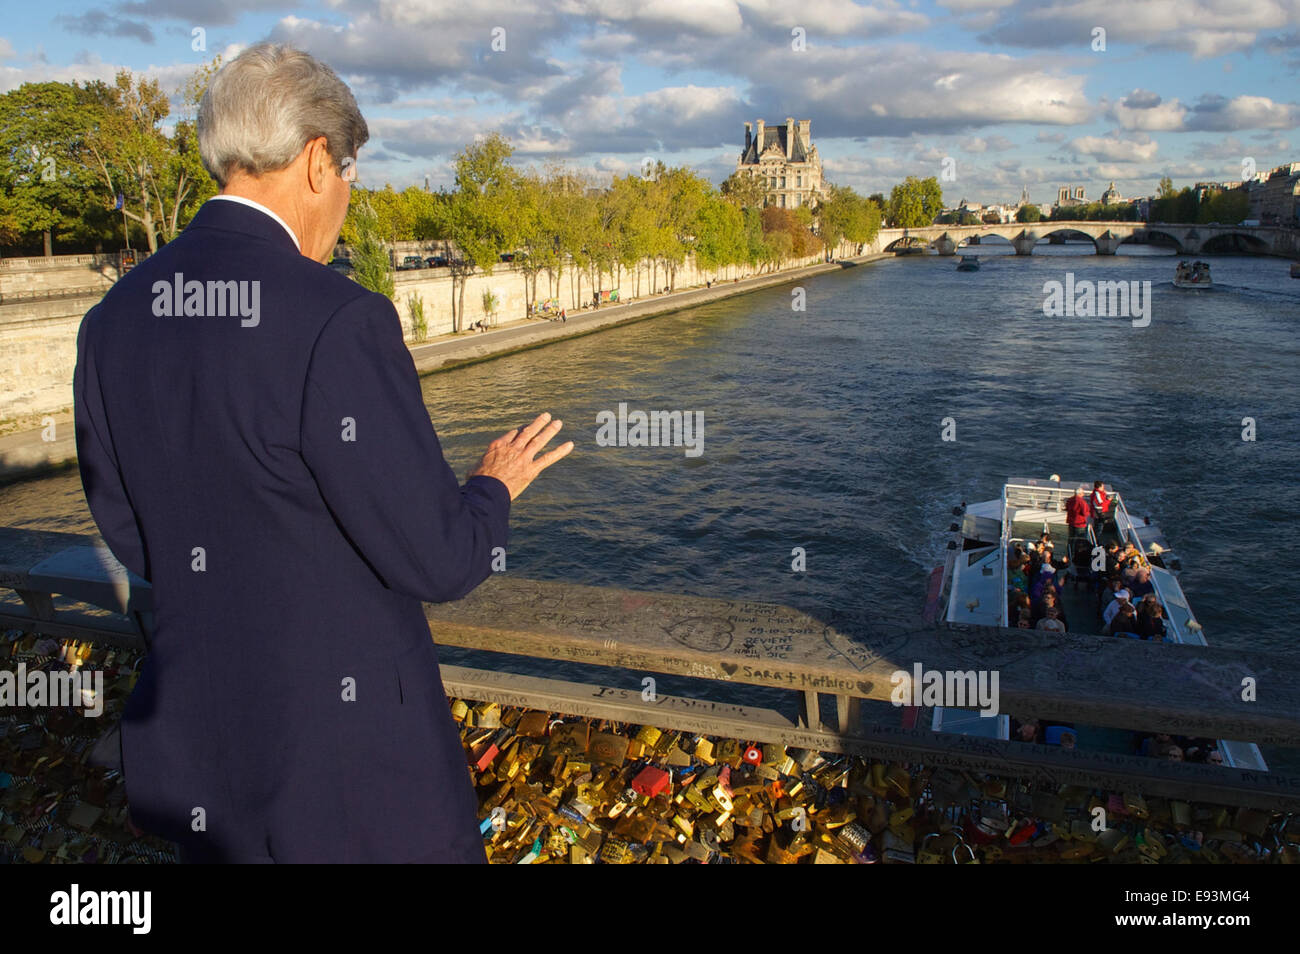 U.S. Secretary of State John Kerry waves to boaters going under the Passerelle del Solferino as he crosses the Seine River while walking to the Quai d’Orsay in Paris, France, for a meeting with French Foreign Minister Laurent Fabius on Oct. 13, 2014. Stock Photo